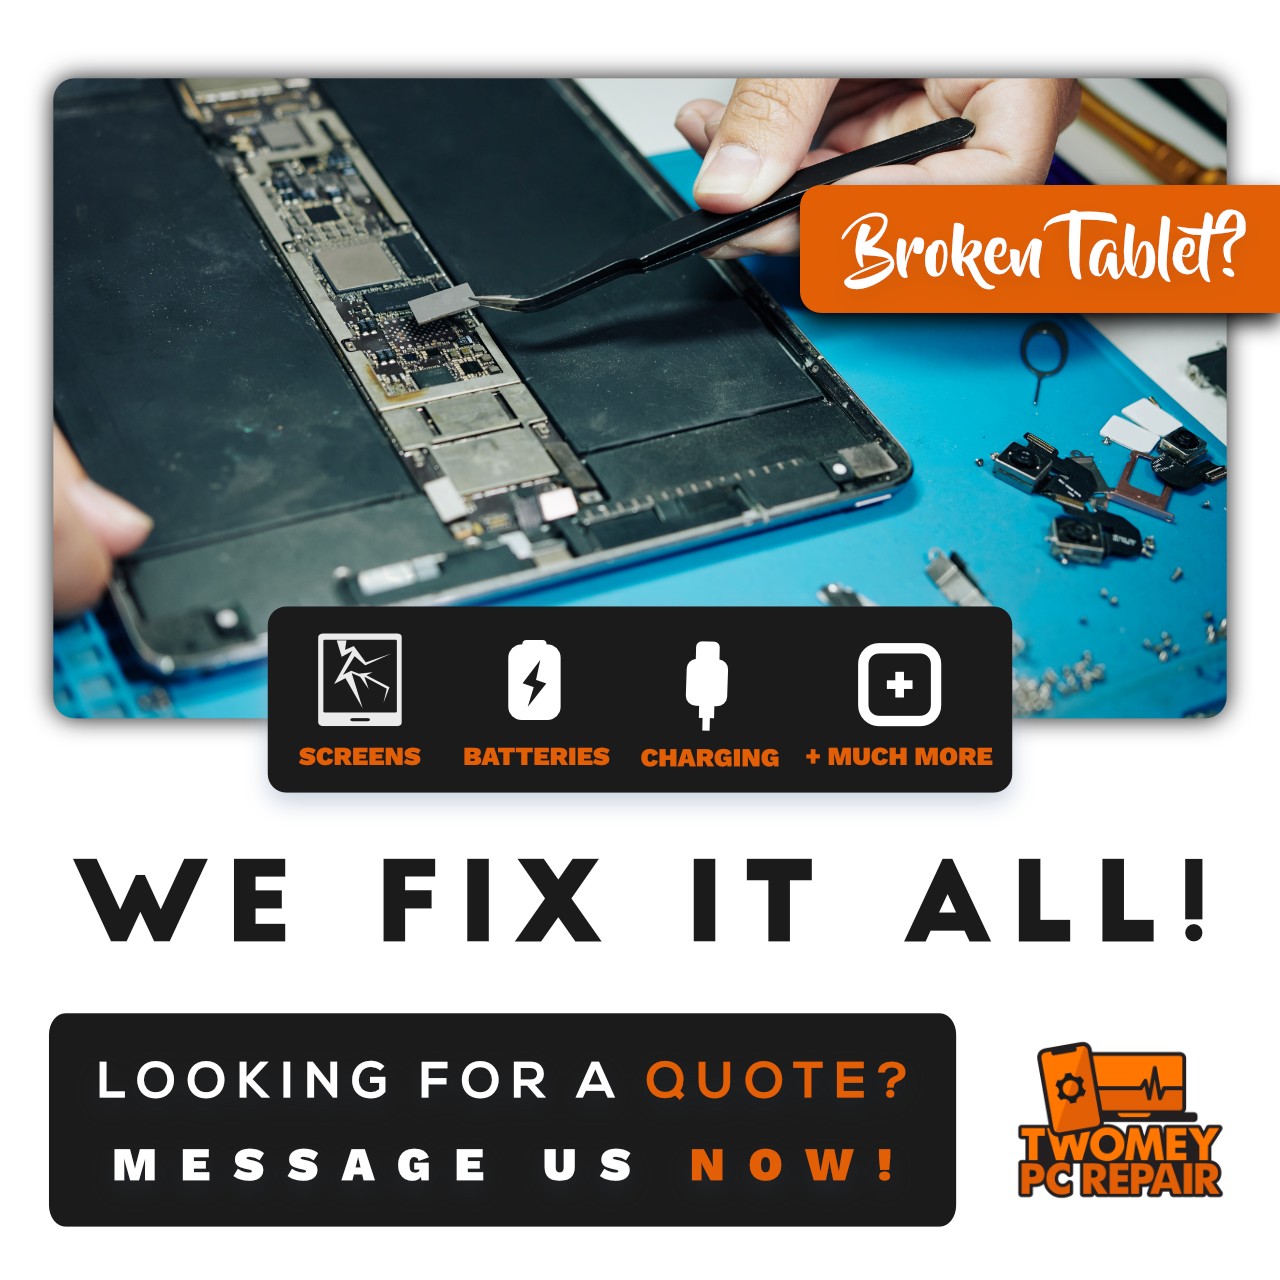 A tablet repair service that fixes all types of broken tablets.